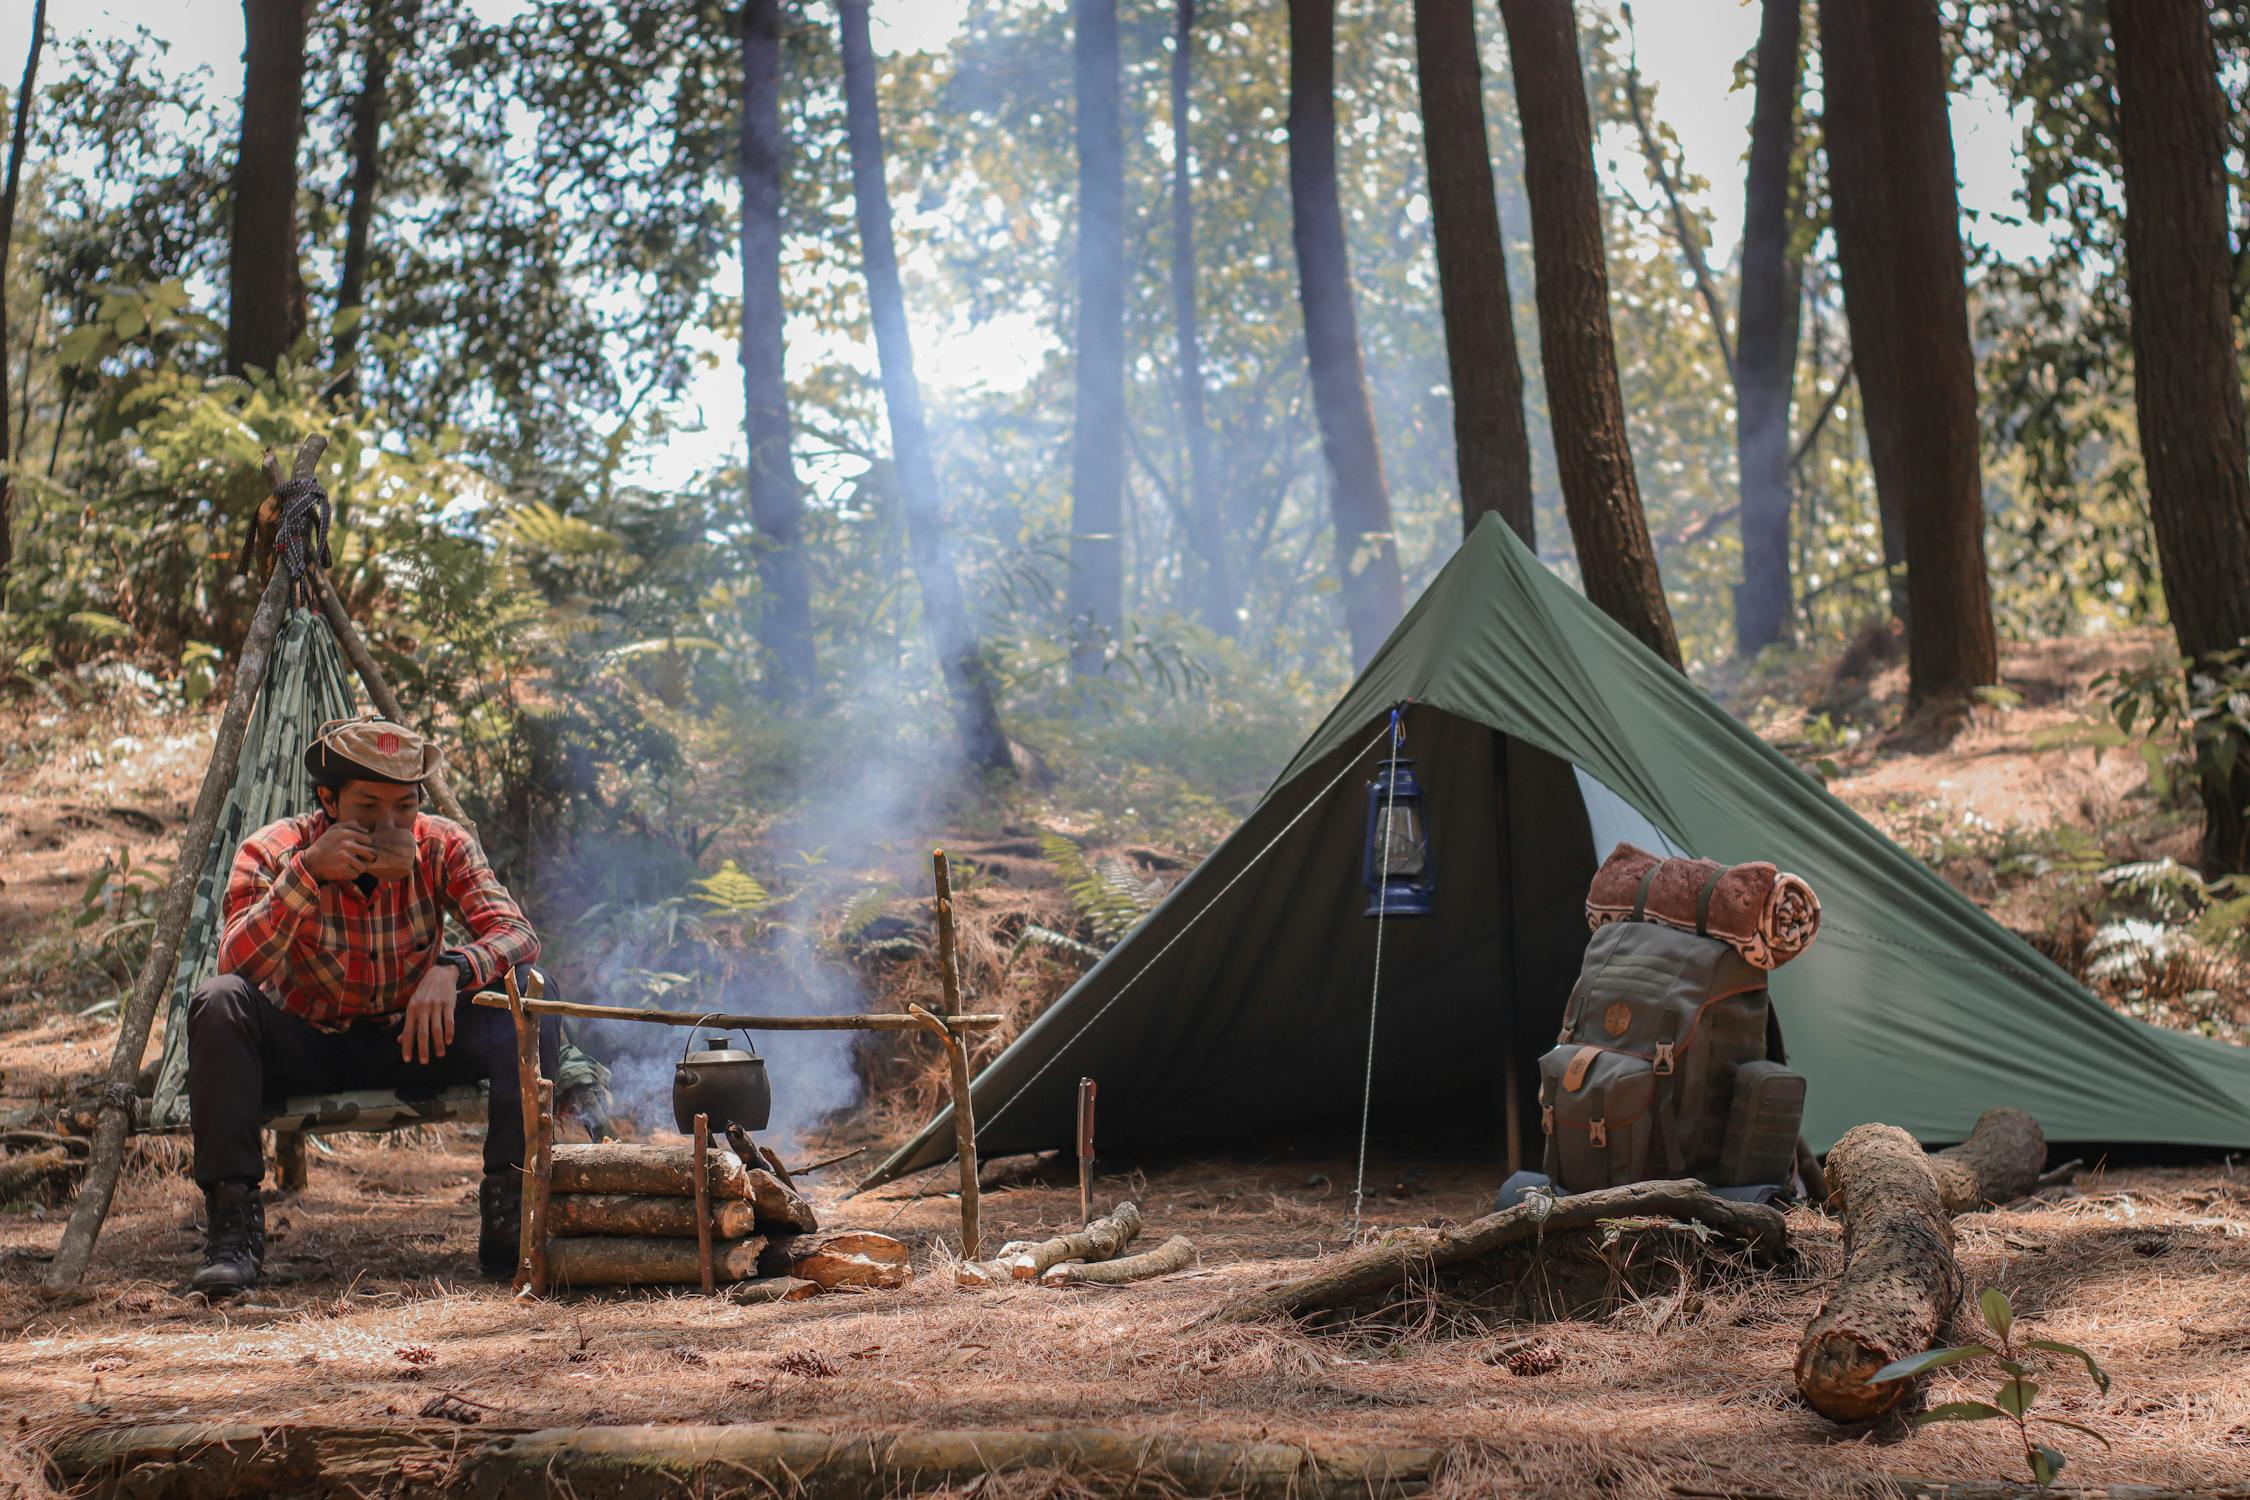 Camping Photo by Baihaki Hine from Pexels